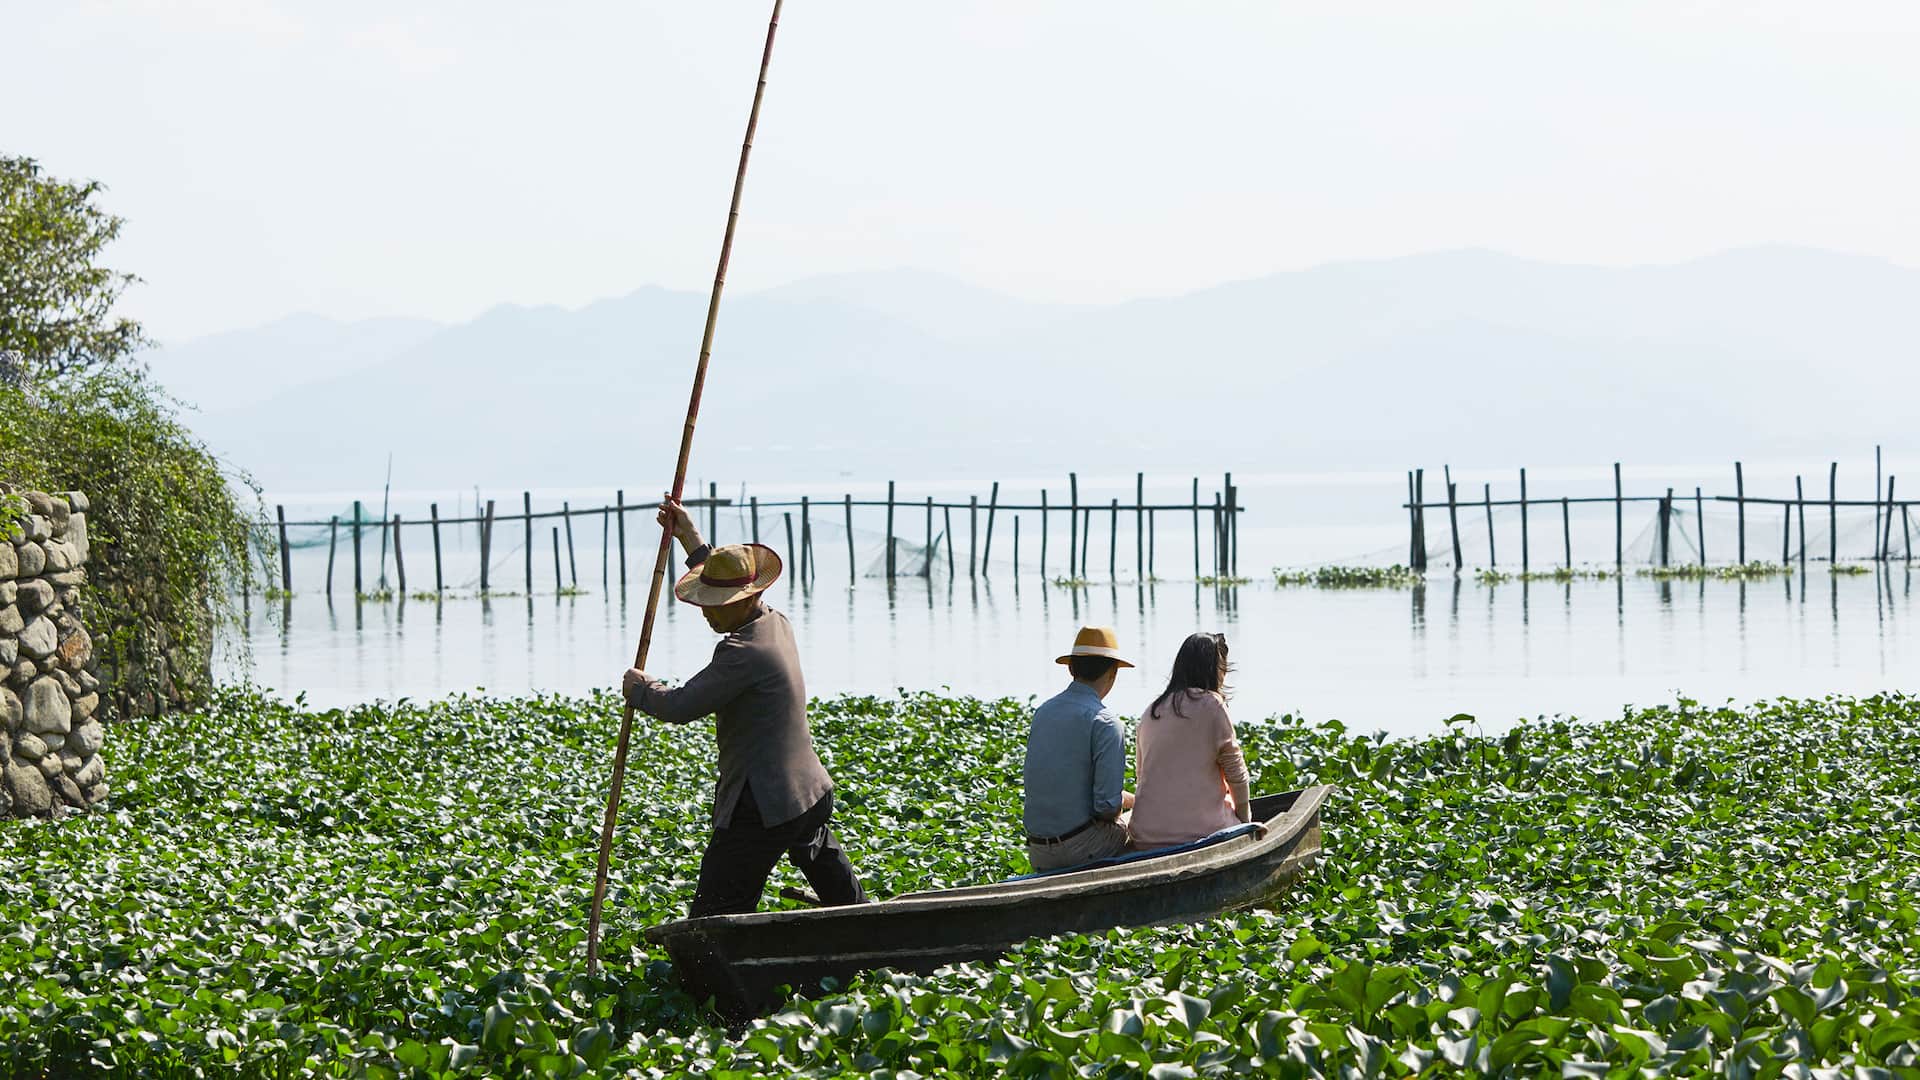 Lifestyle of adventure, leisure and lake recreation awaits! Hanoi Attractions